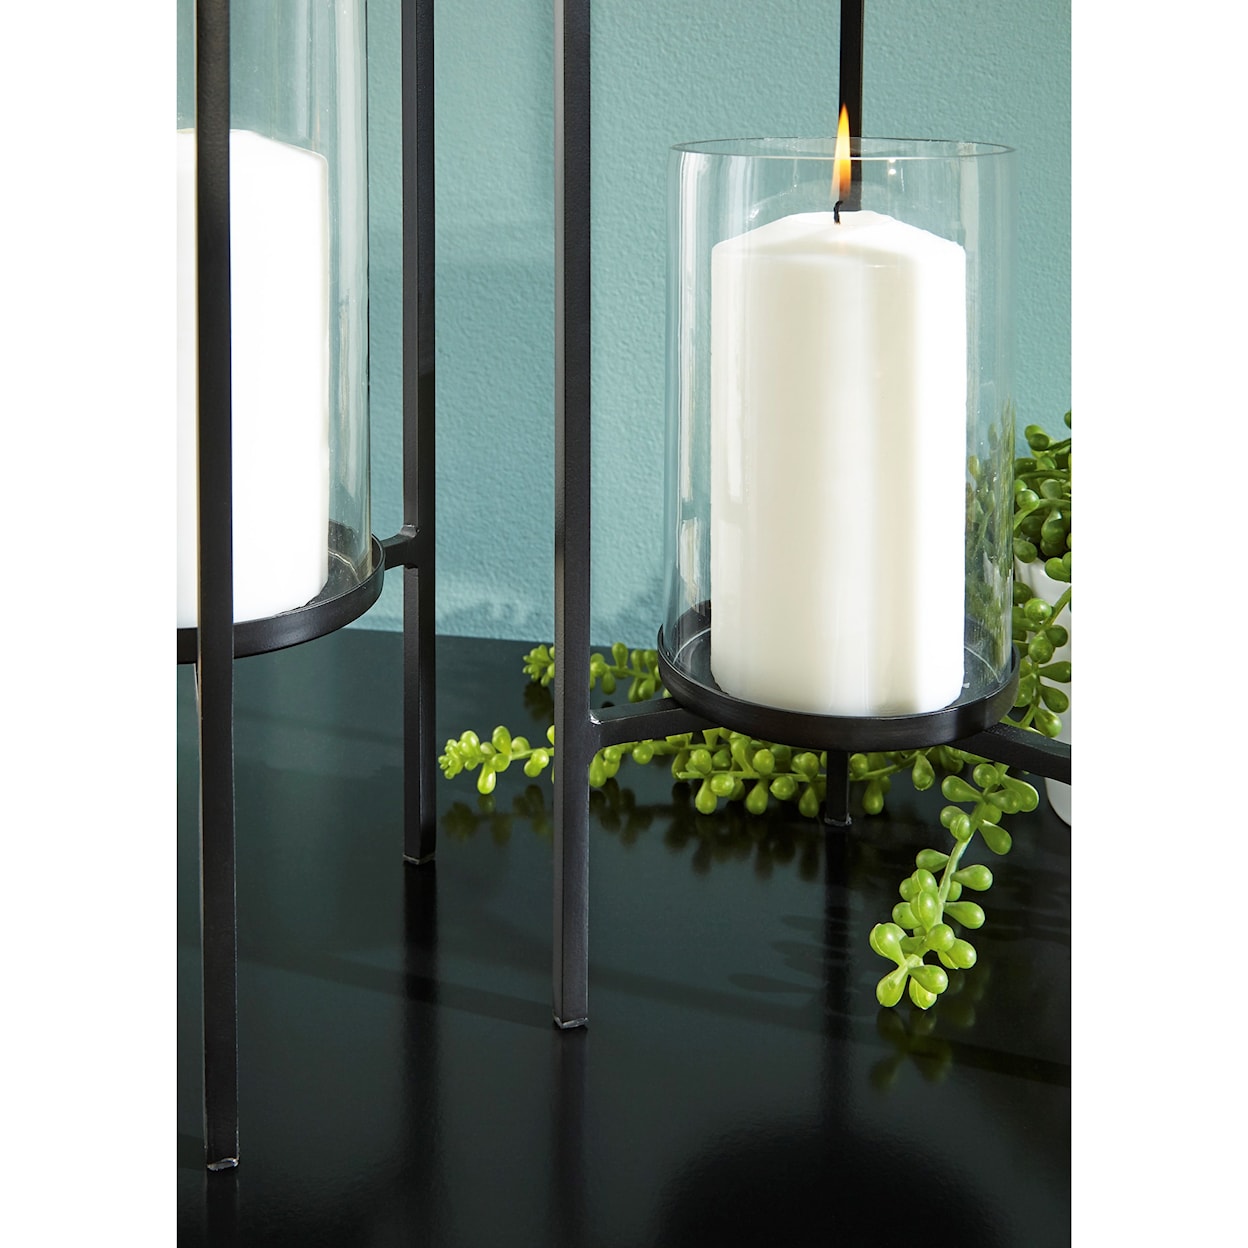 Benchcraft Accents Ginette Candle Holder (Set of 2)